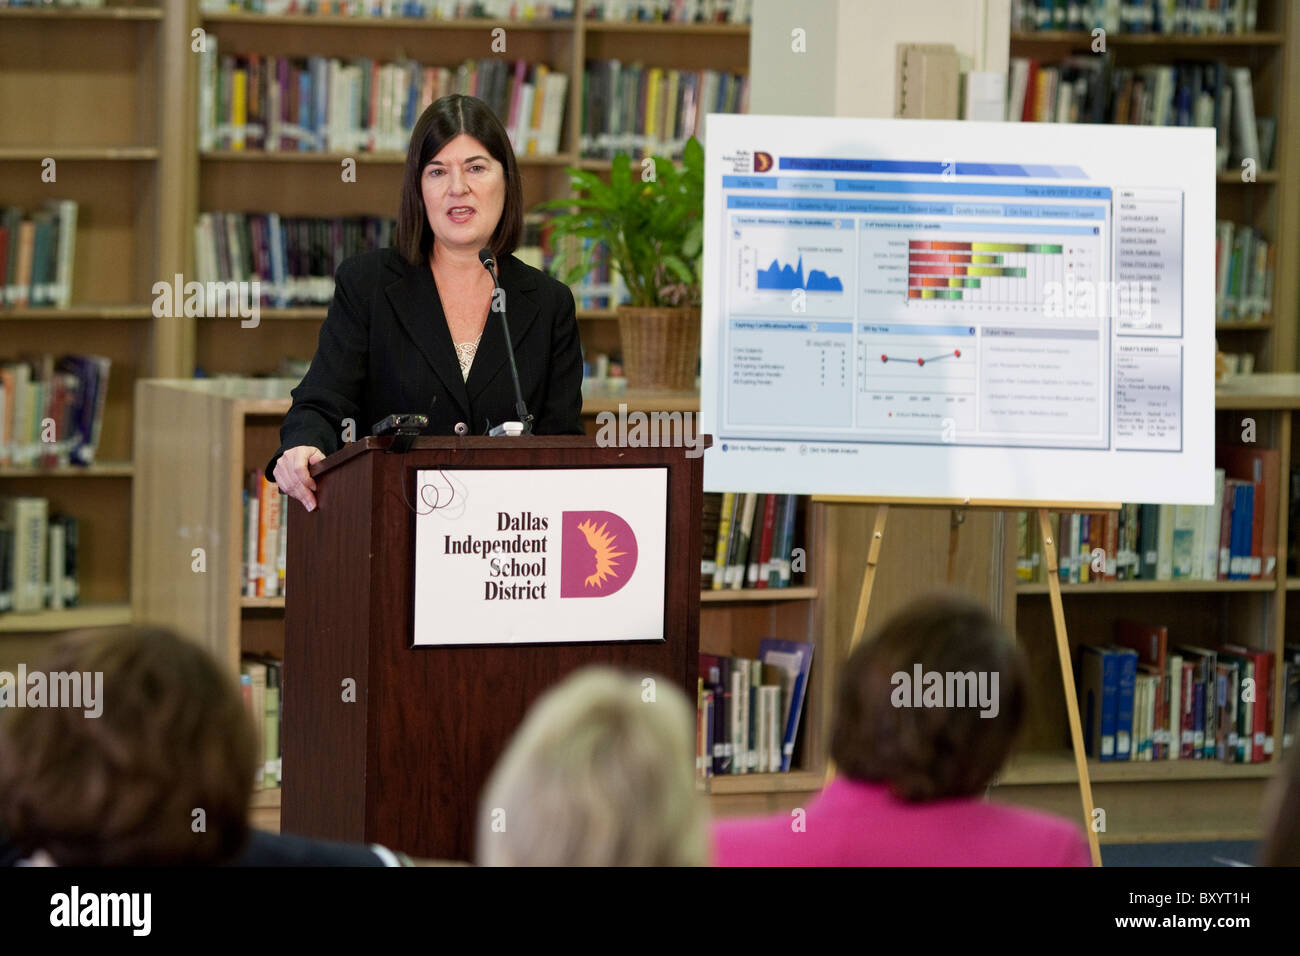 Professional woman makes presentation during press conference at public school library in Dallas, Texas Stock Photo